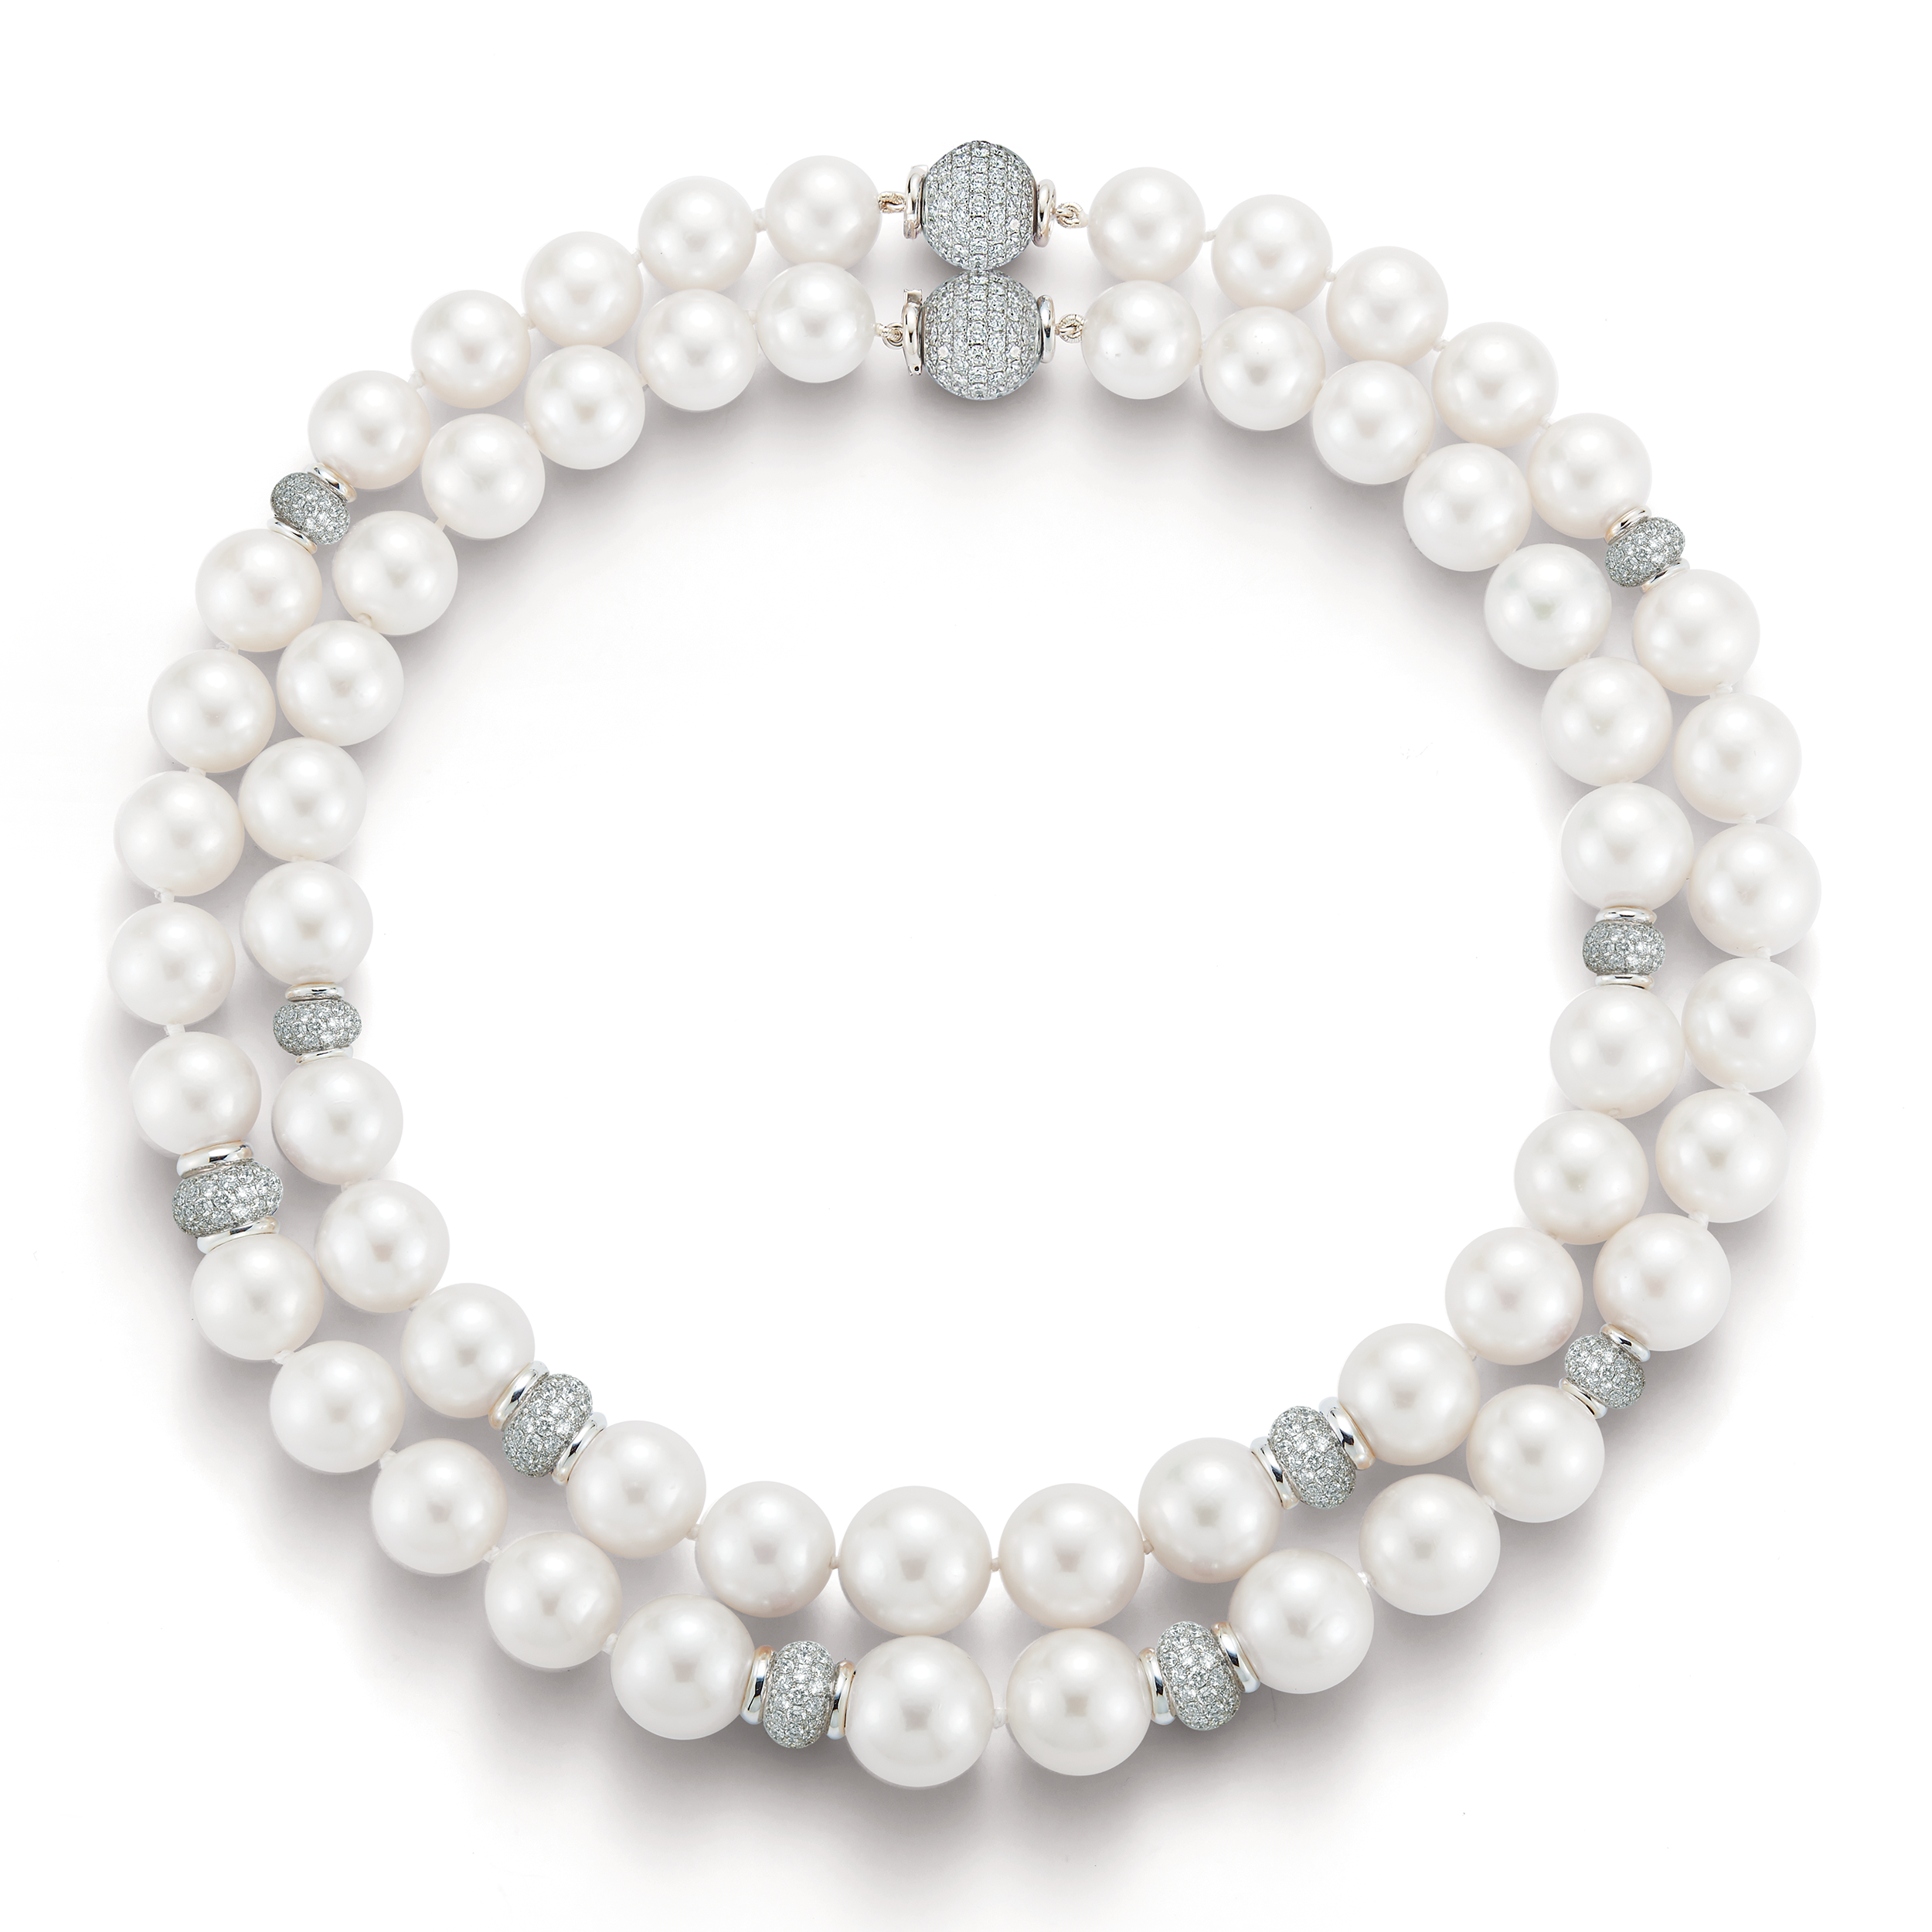 Juno Pearl Necklaces with Pave Diamond